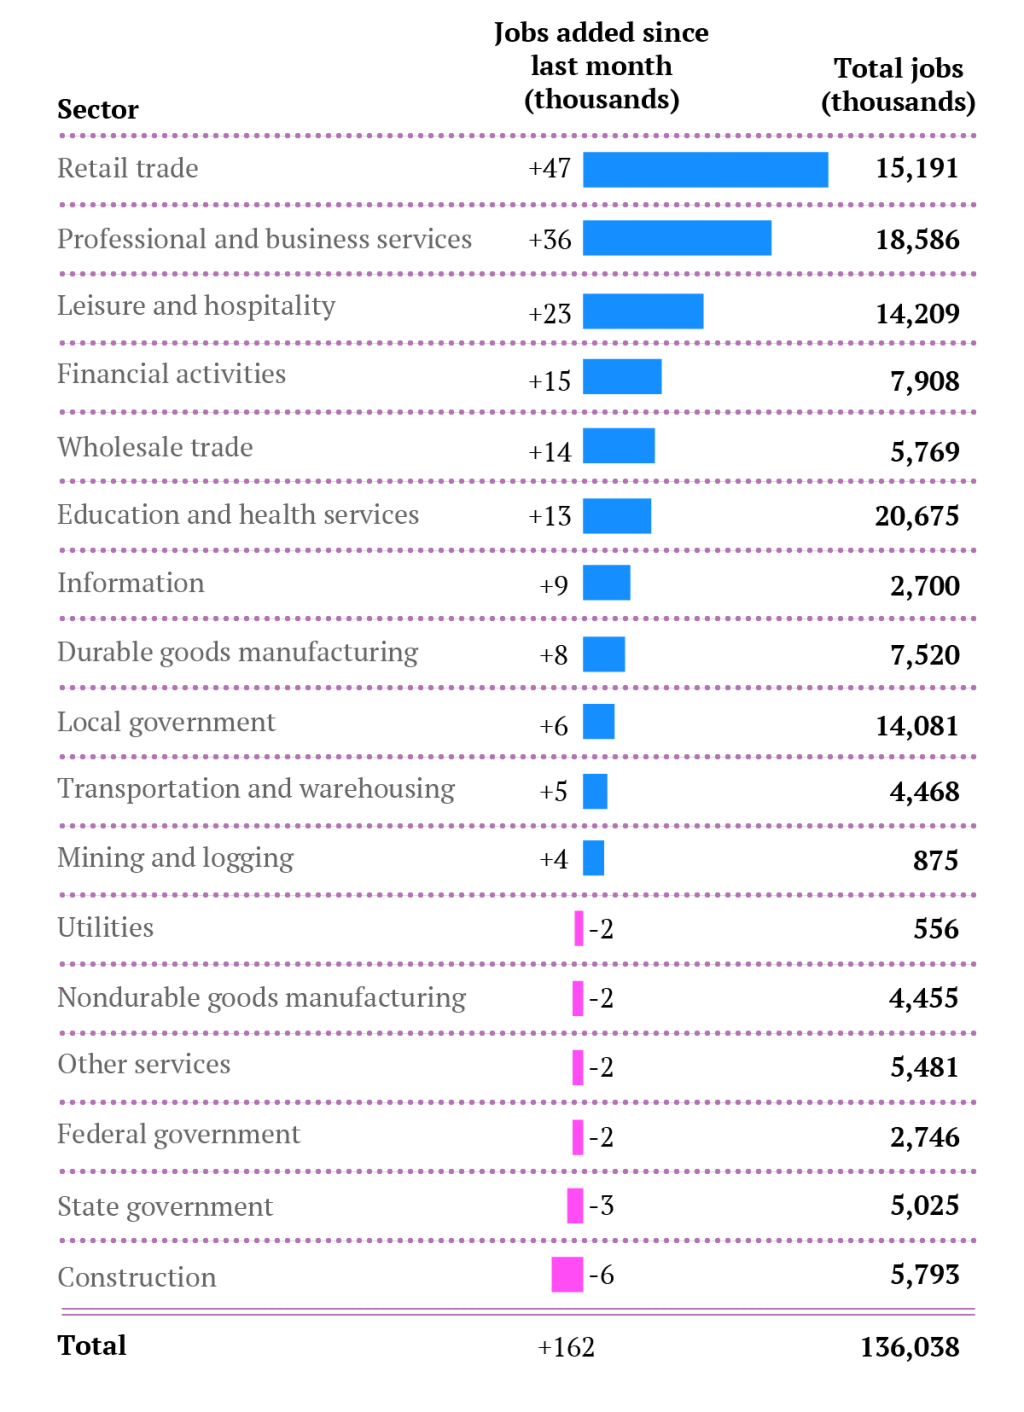 Jobs-by-sector-July13